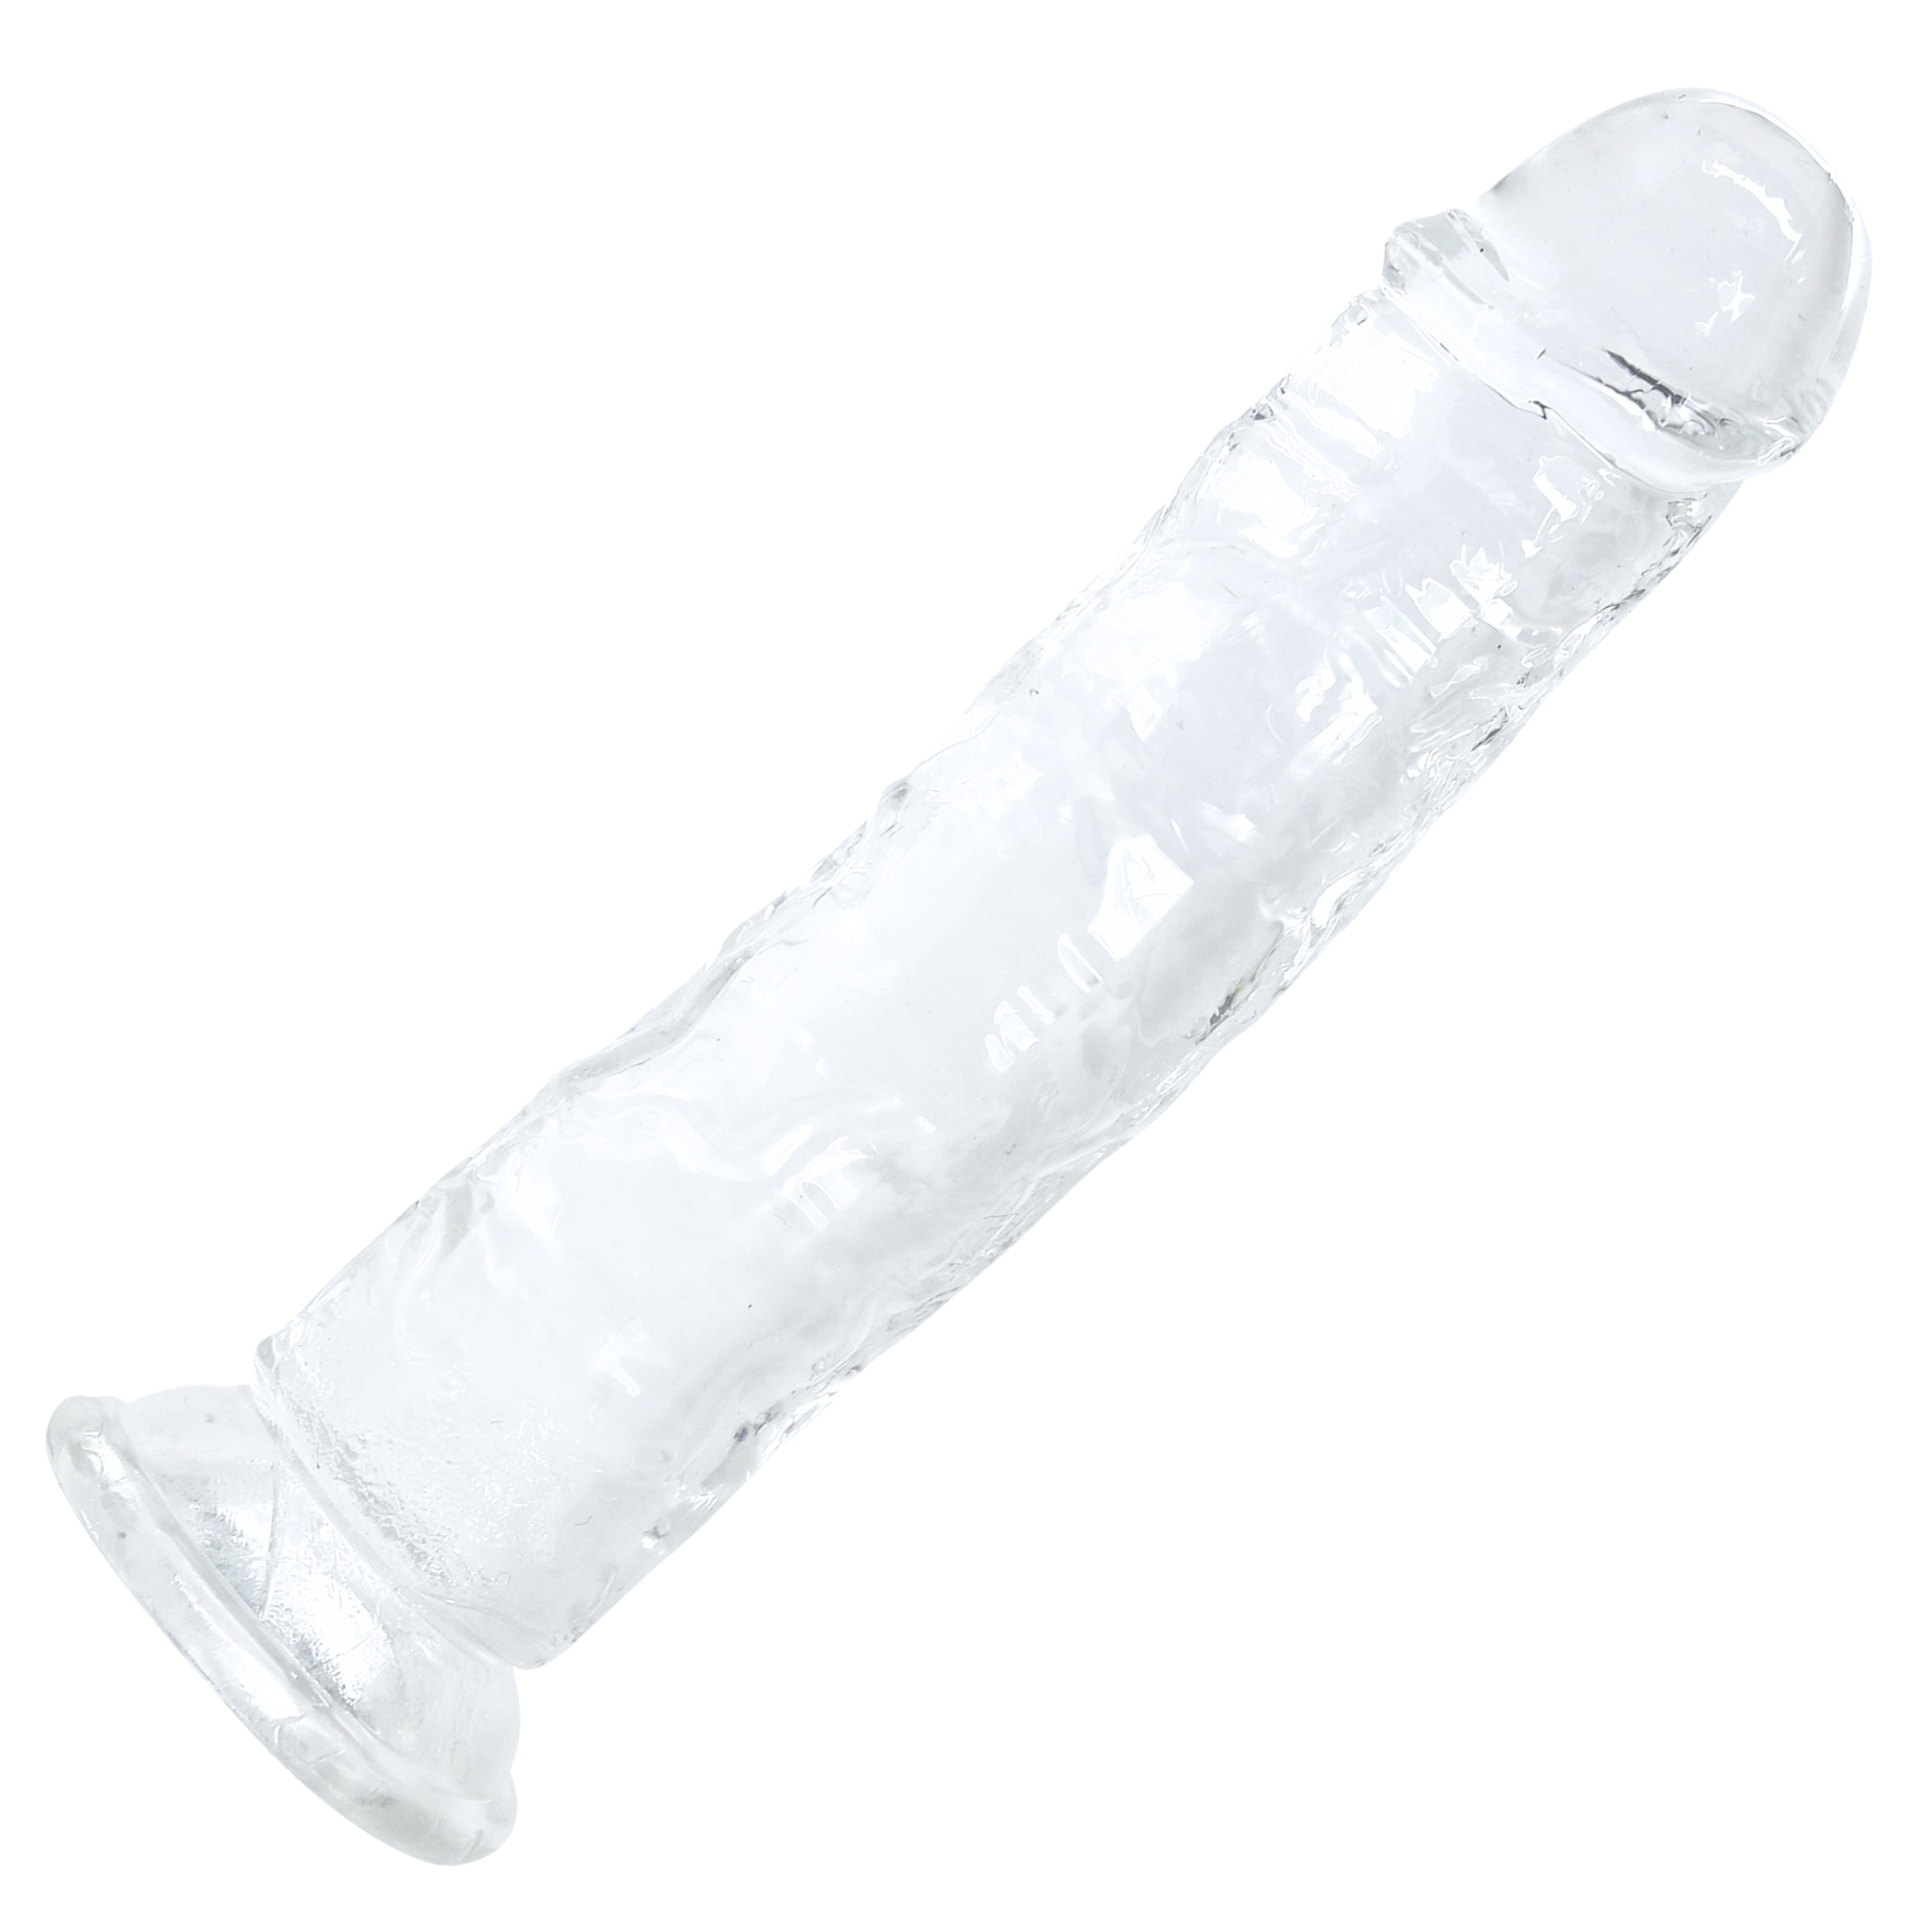 Ultra Lifelike Clear Suction Cup Dildo For Hands-Free Riding